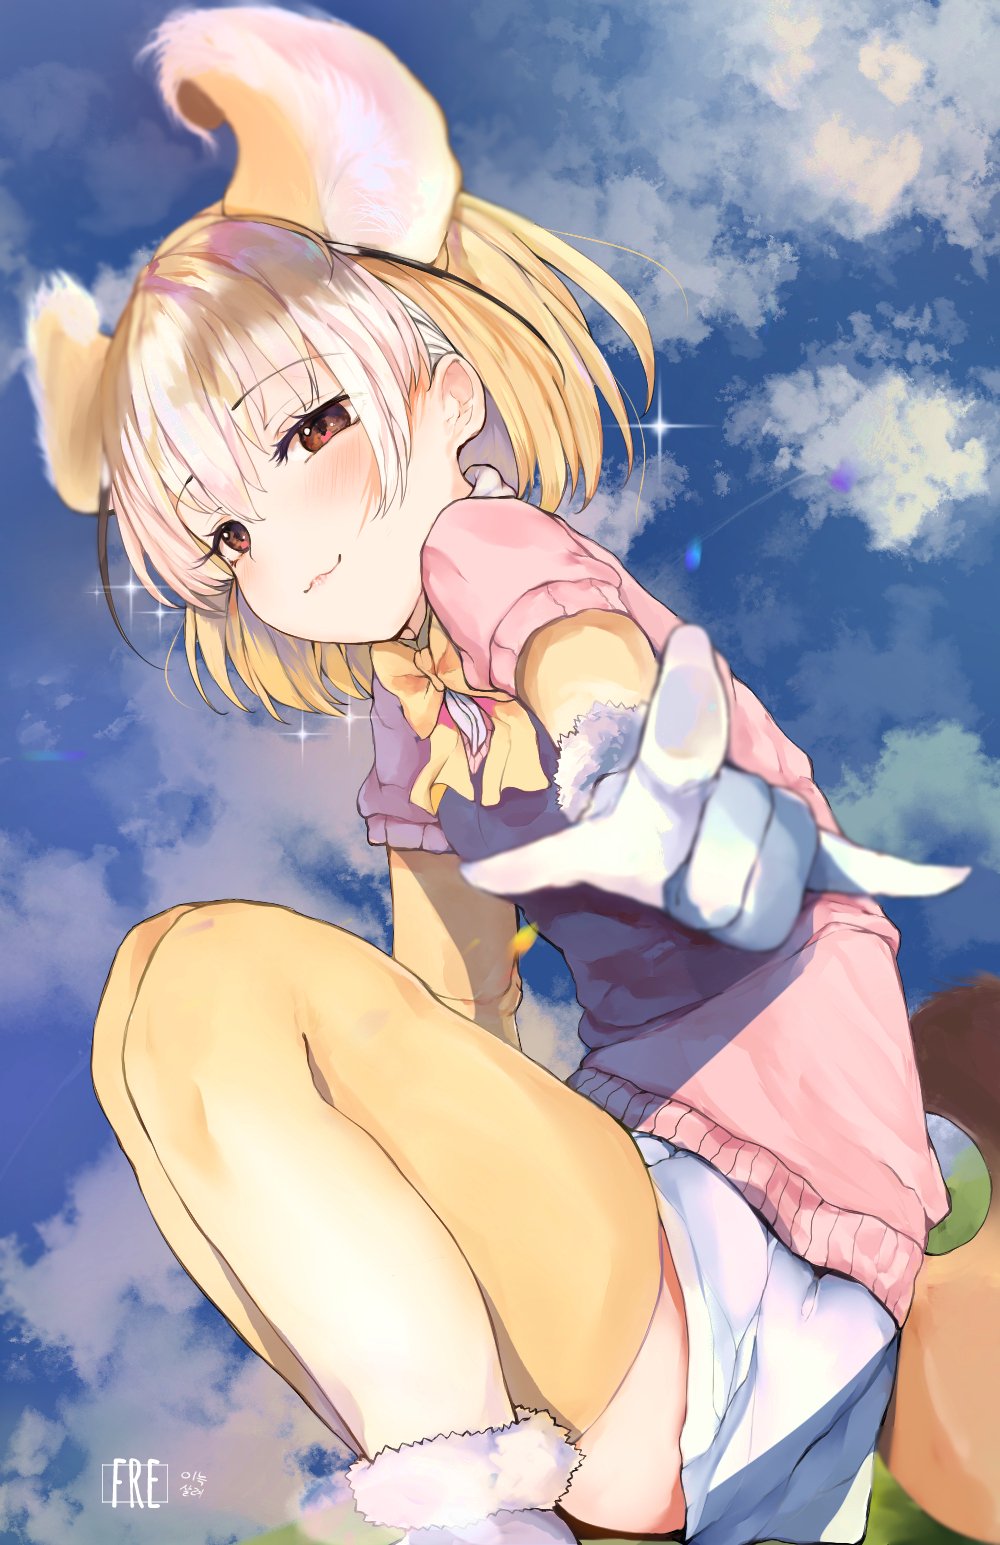 1girl :3 animal_ears blonde_hair blush bow bowtie commentary dnsdltkfkd elbow_gloves eyebrows_visible_through_hair fennec_(kemono_friends) fox_ears fox_tail fur_trim gloves highres looking_at_viewer multicolored_hair pleated_skirt pointing pointing_at_viewer red_eyes short_hair short_sleeves skirt solo sparkle squatting sweater tail thigh-highs white_hair zettai_ryouiki